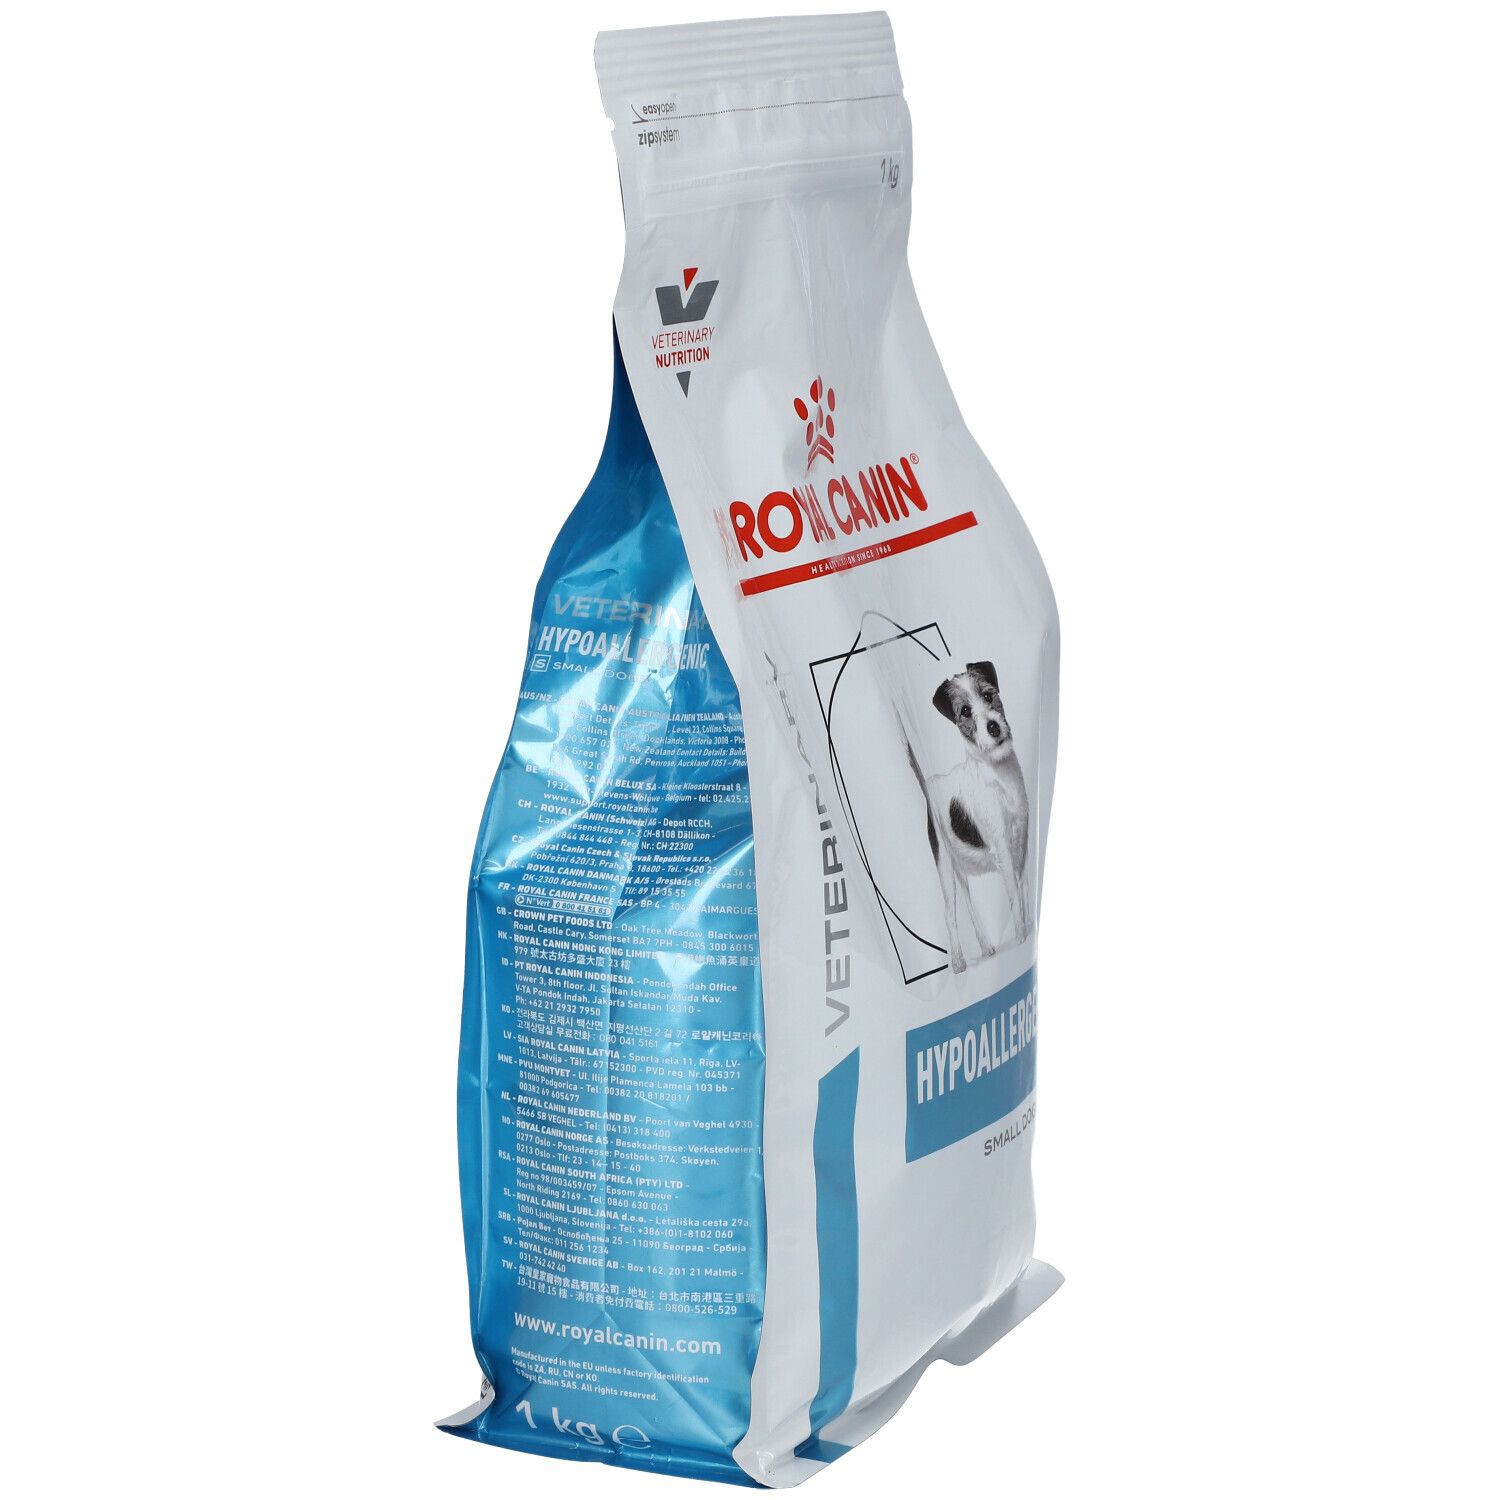 Royal Canin® Hypoallergenic petit chien